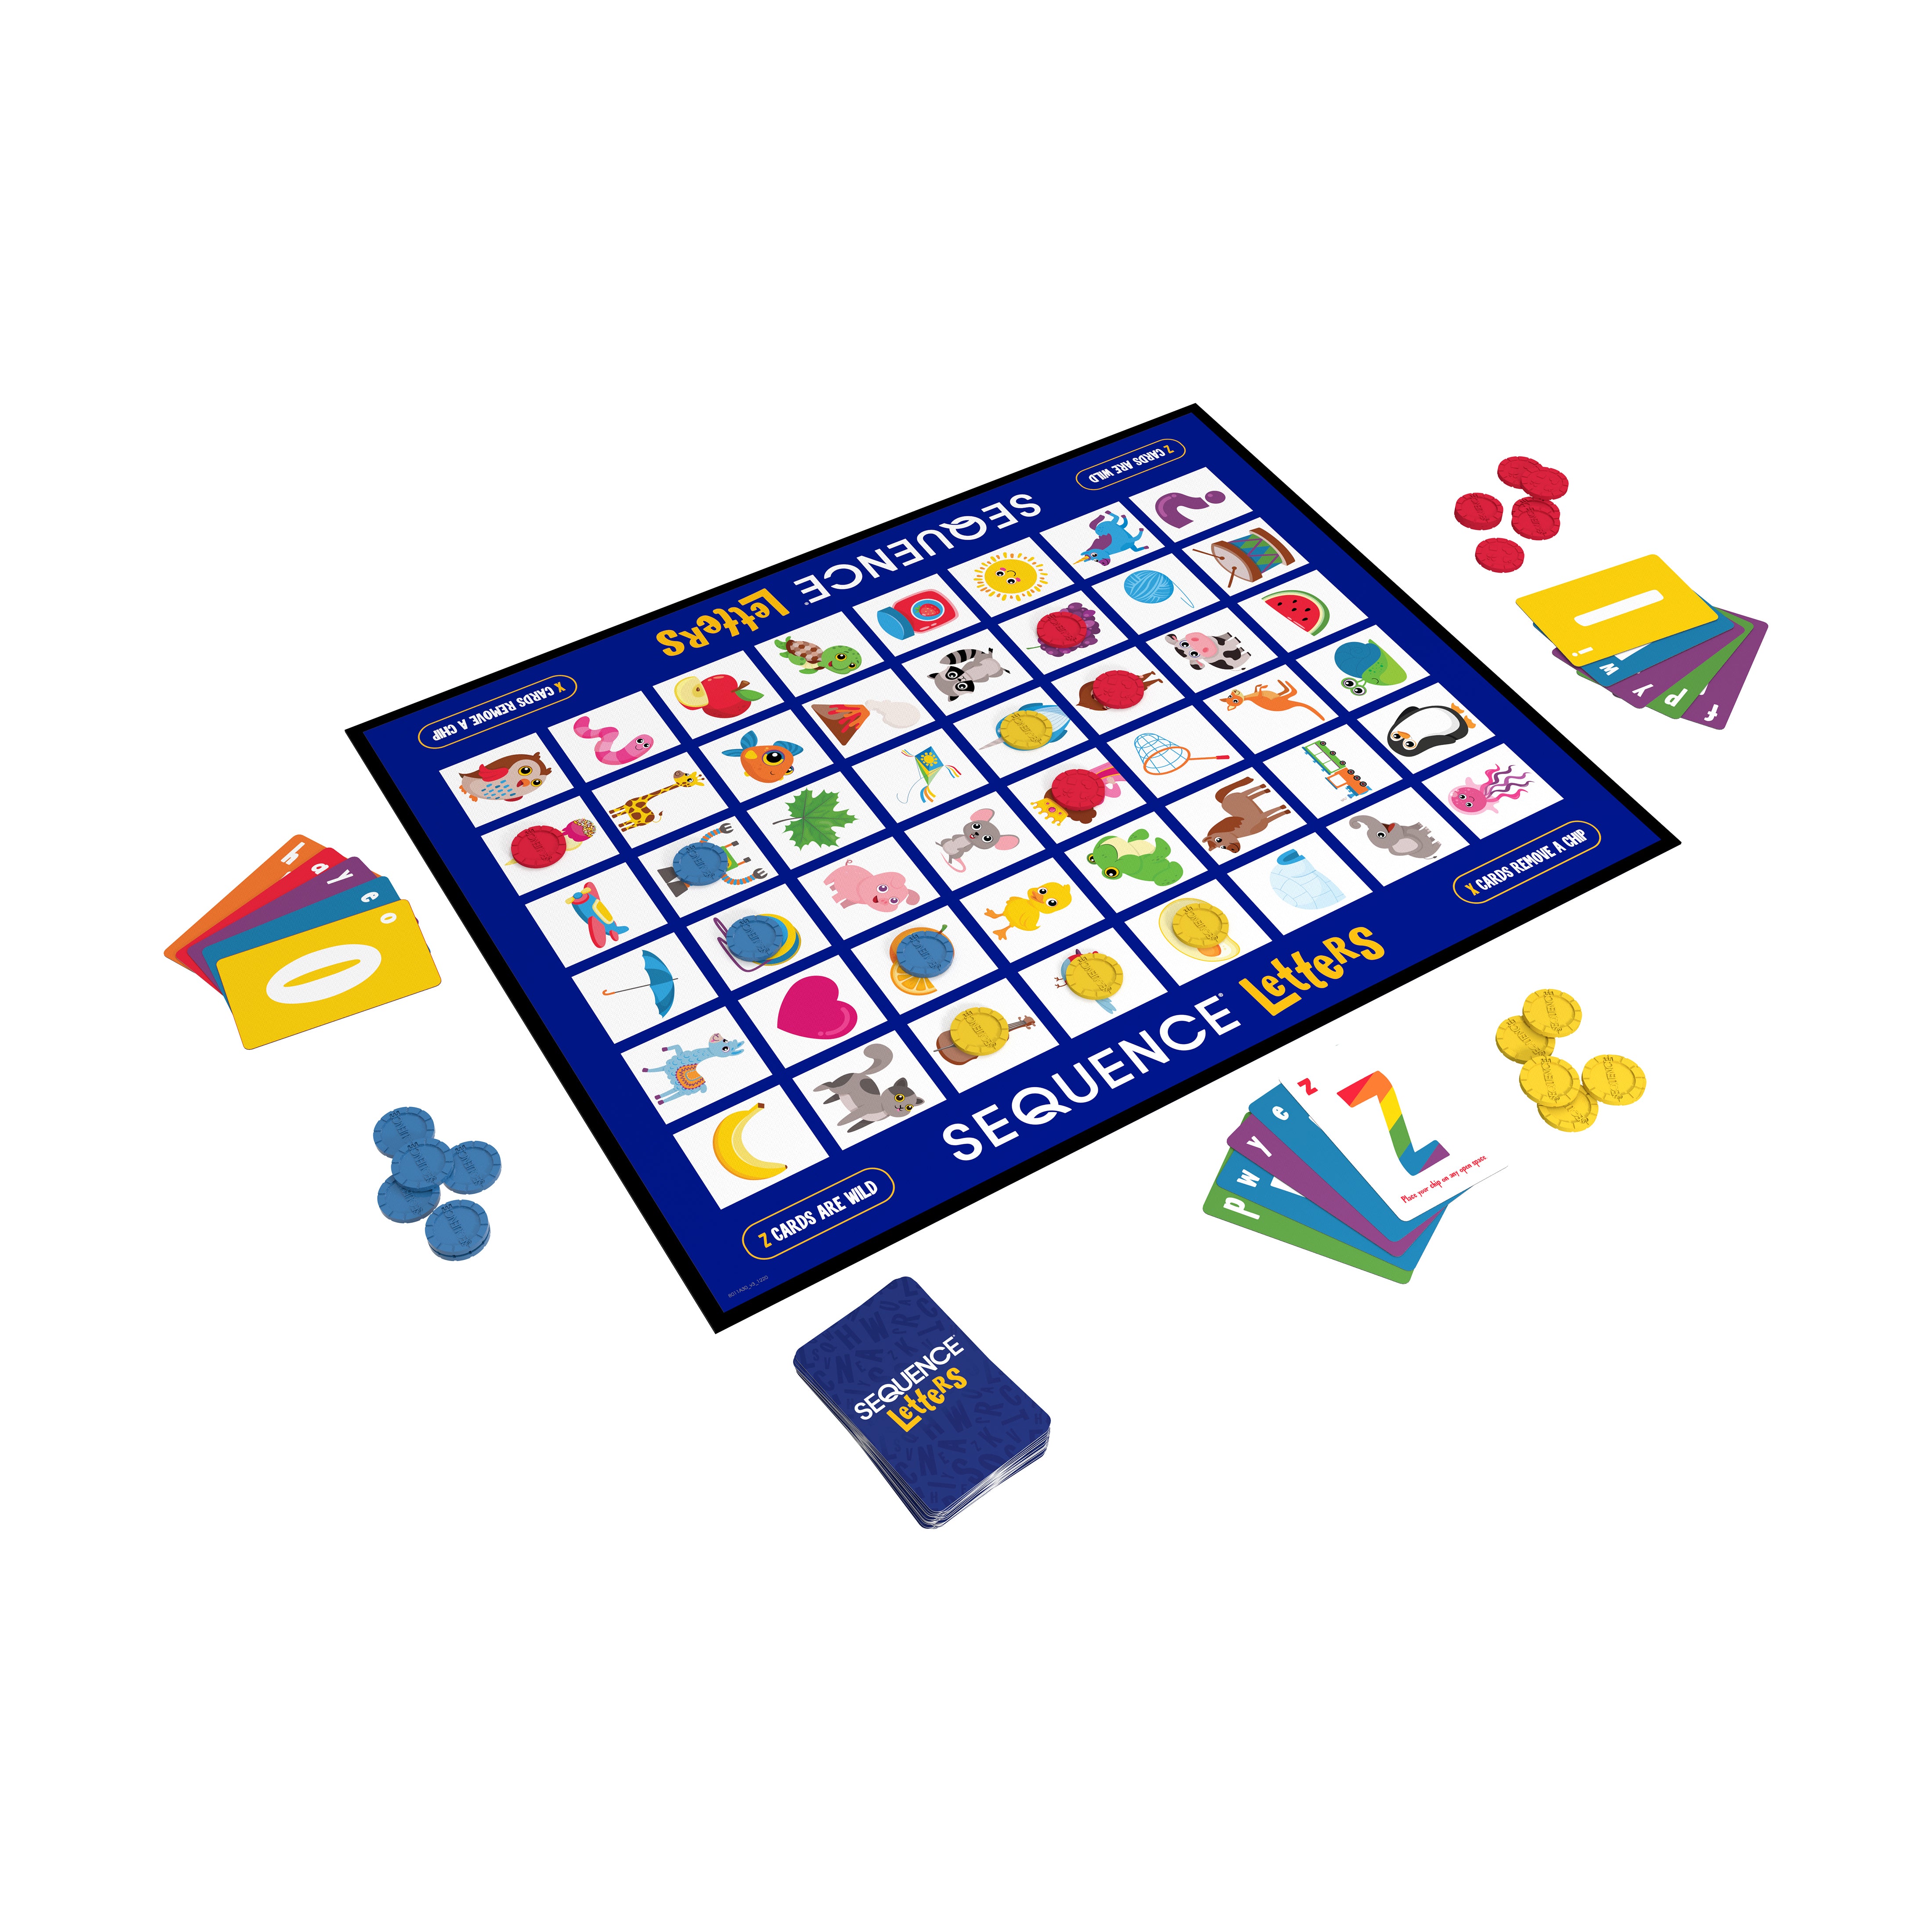 Sequence Letters Board Game for Kids - JAX8011